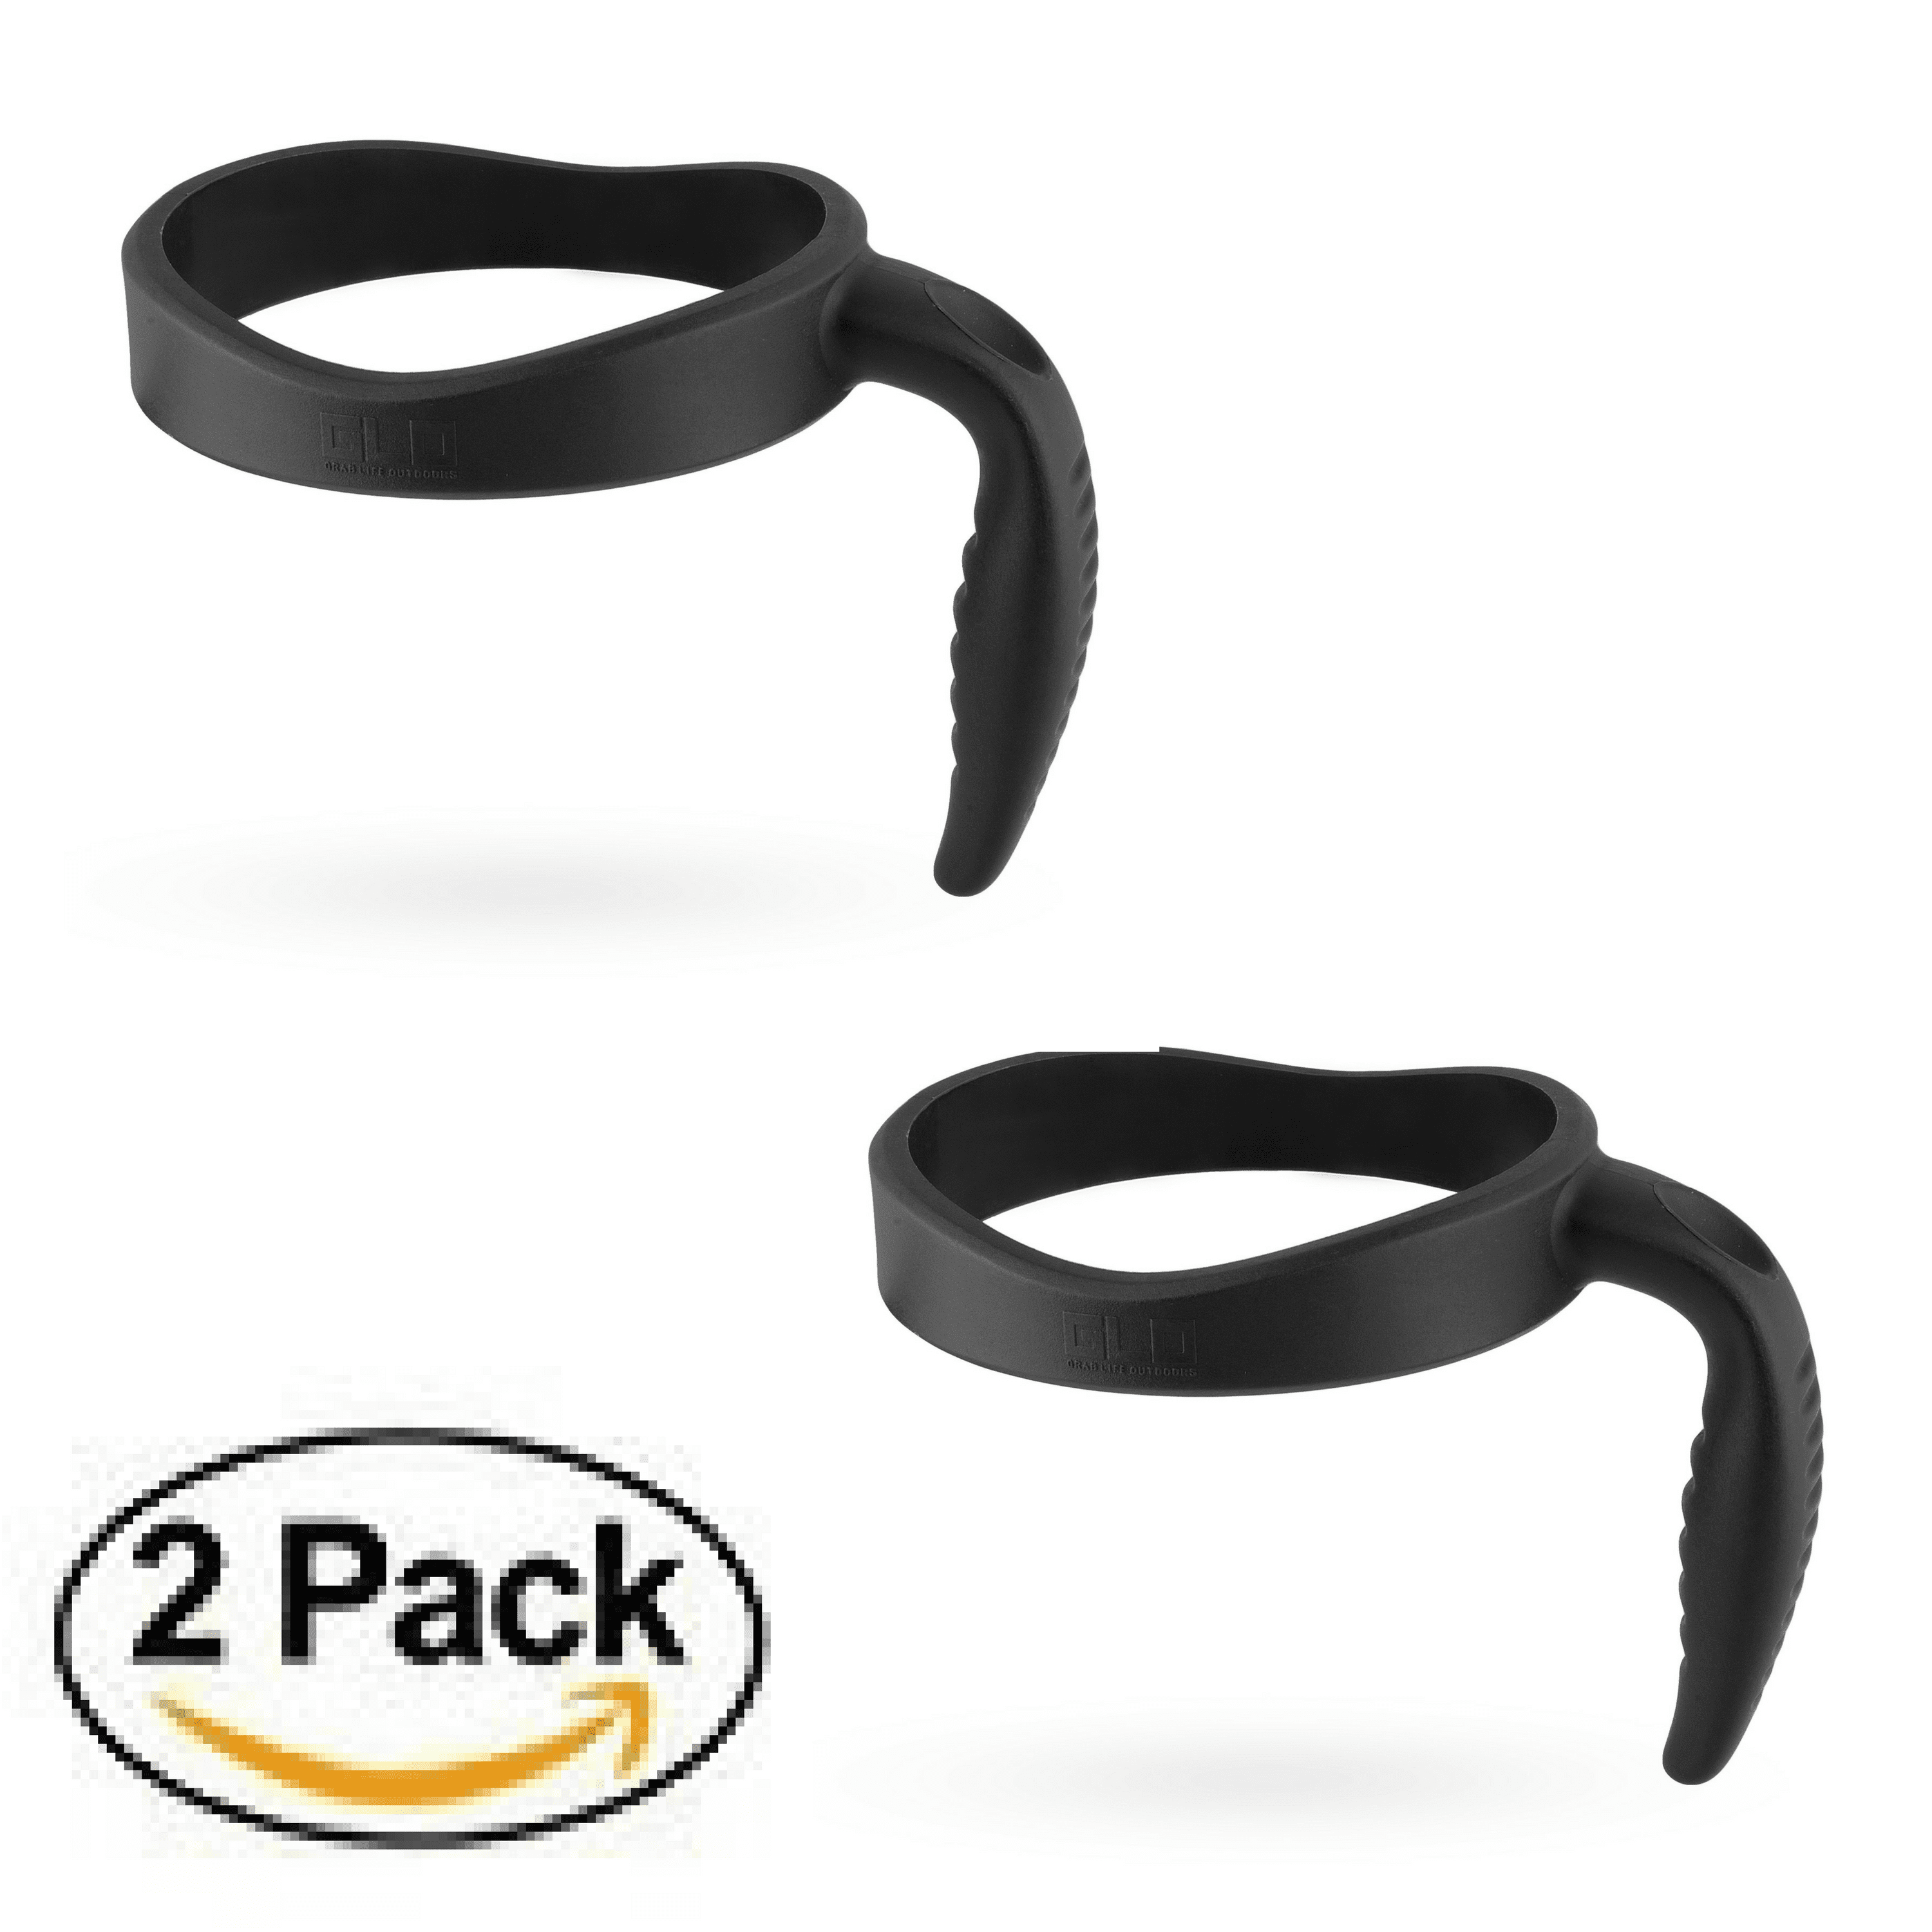 Grab Life Outdoors Handle for 40 oz Tumblers - Fits Ozark Trail, Rtic, Magnum Steel, Pure & More - Handle Only (Black)